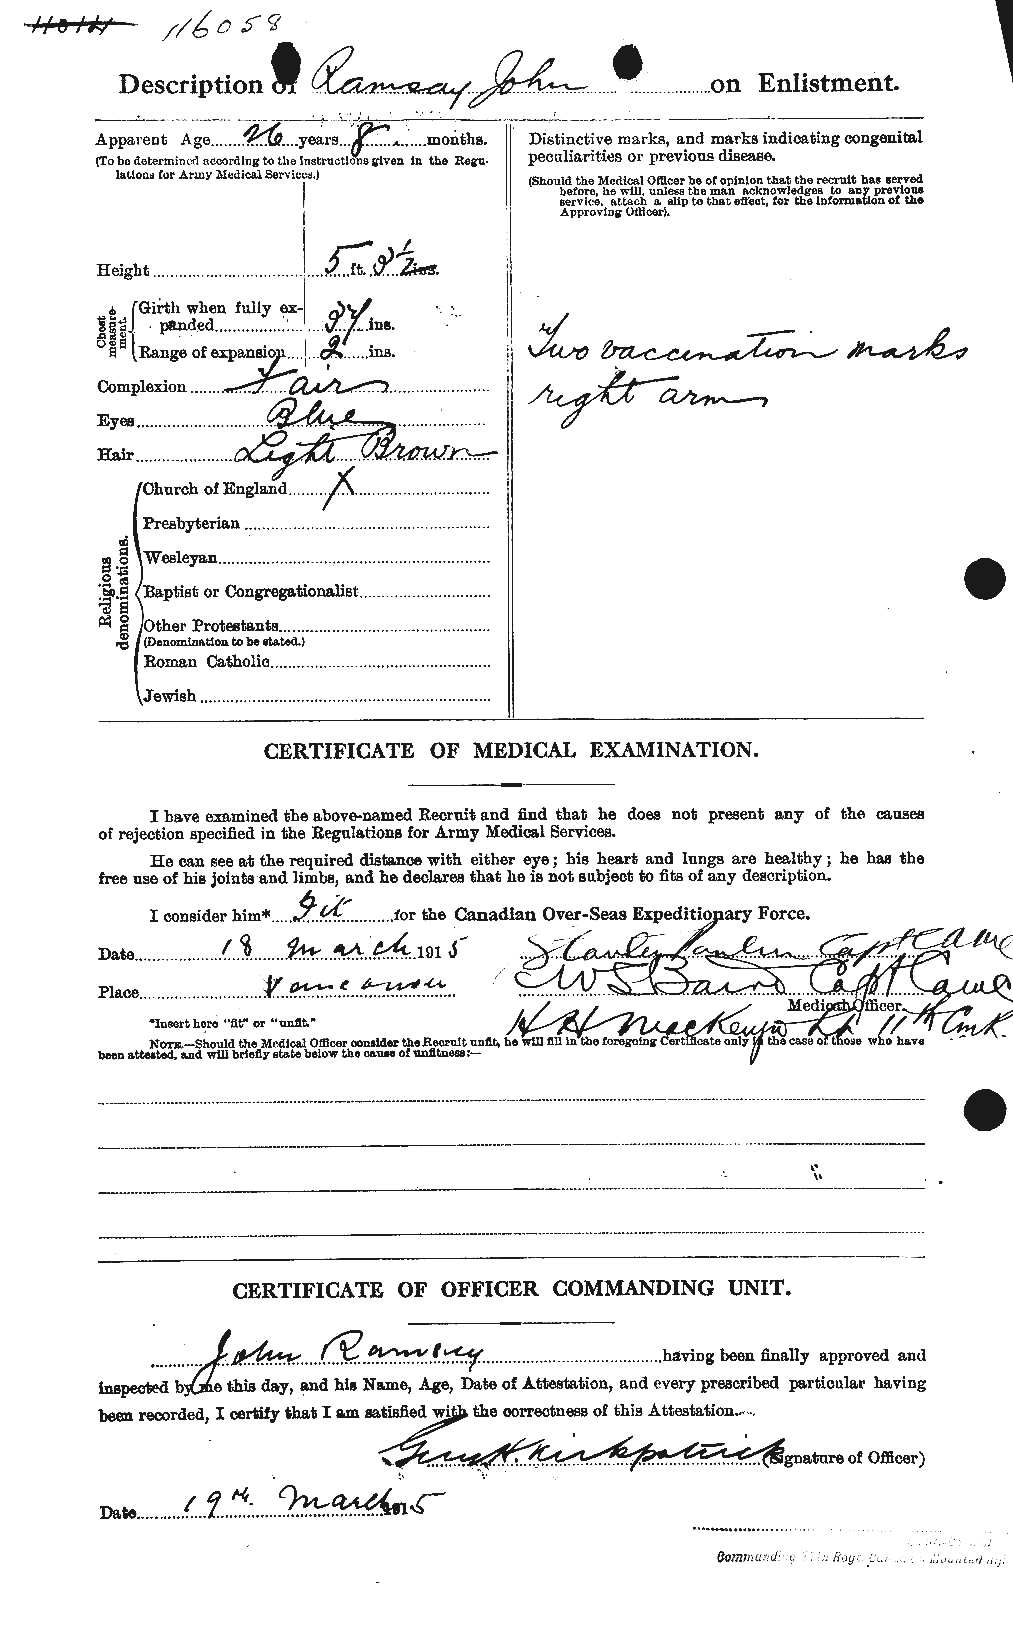 Personnel Records of the First World War - CEF 592542b